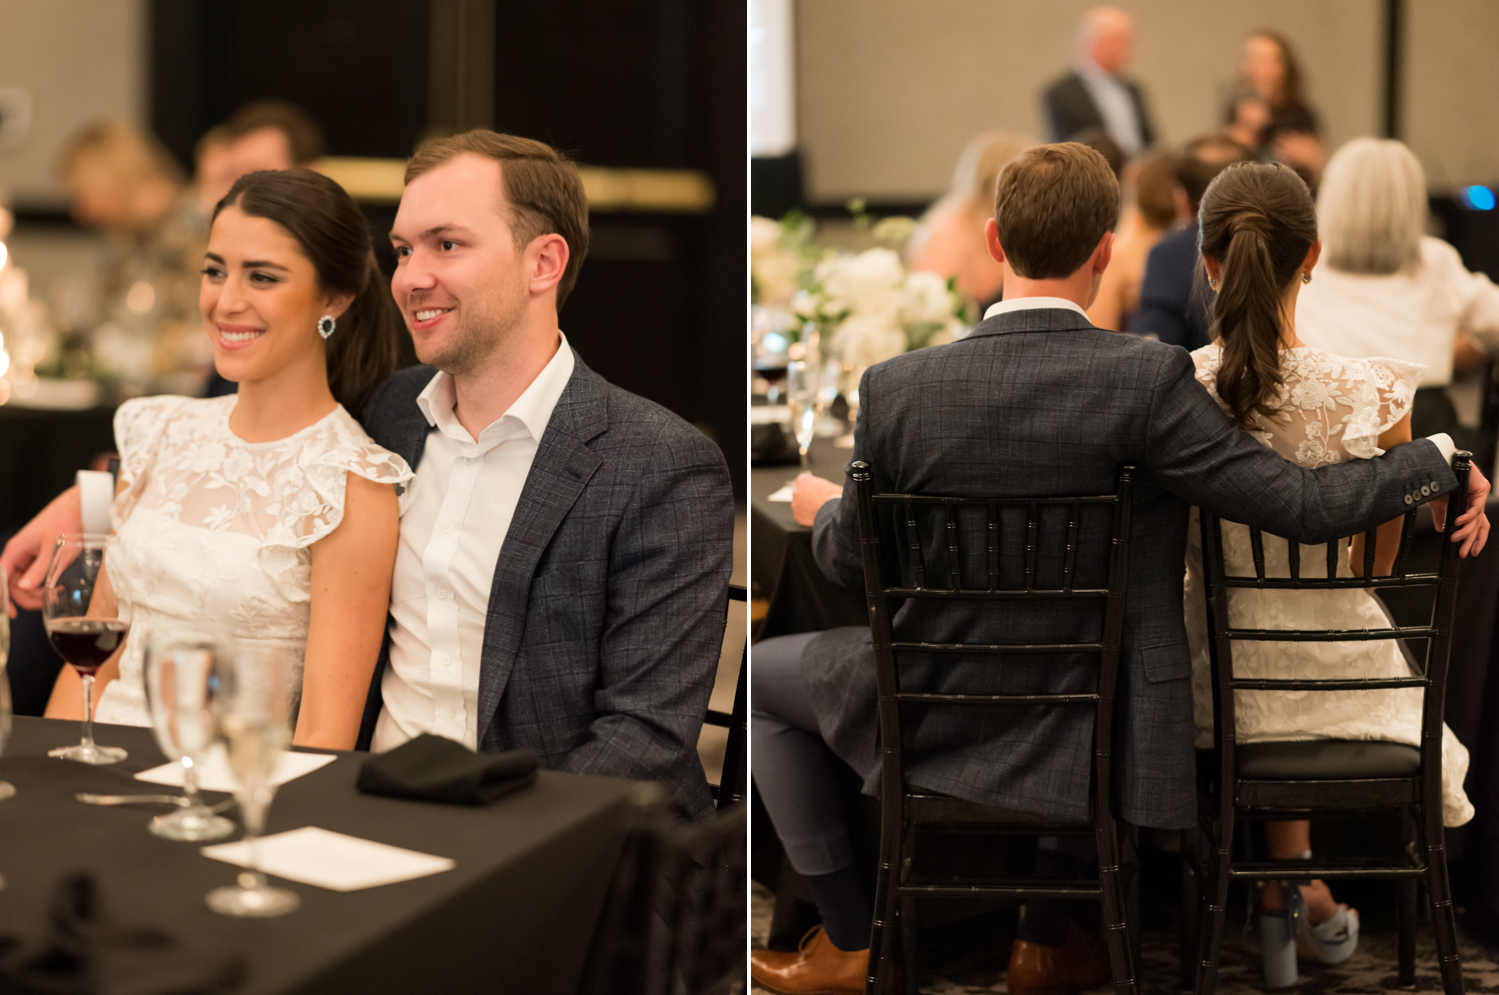 The bride and groom sit at their table at the rehearsal dinner, and the groom puts his arm around his bride